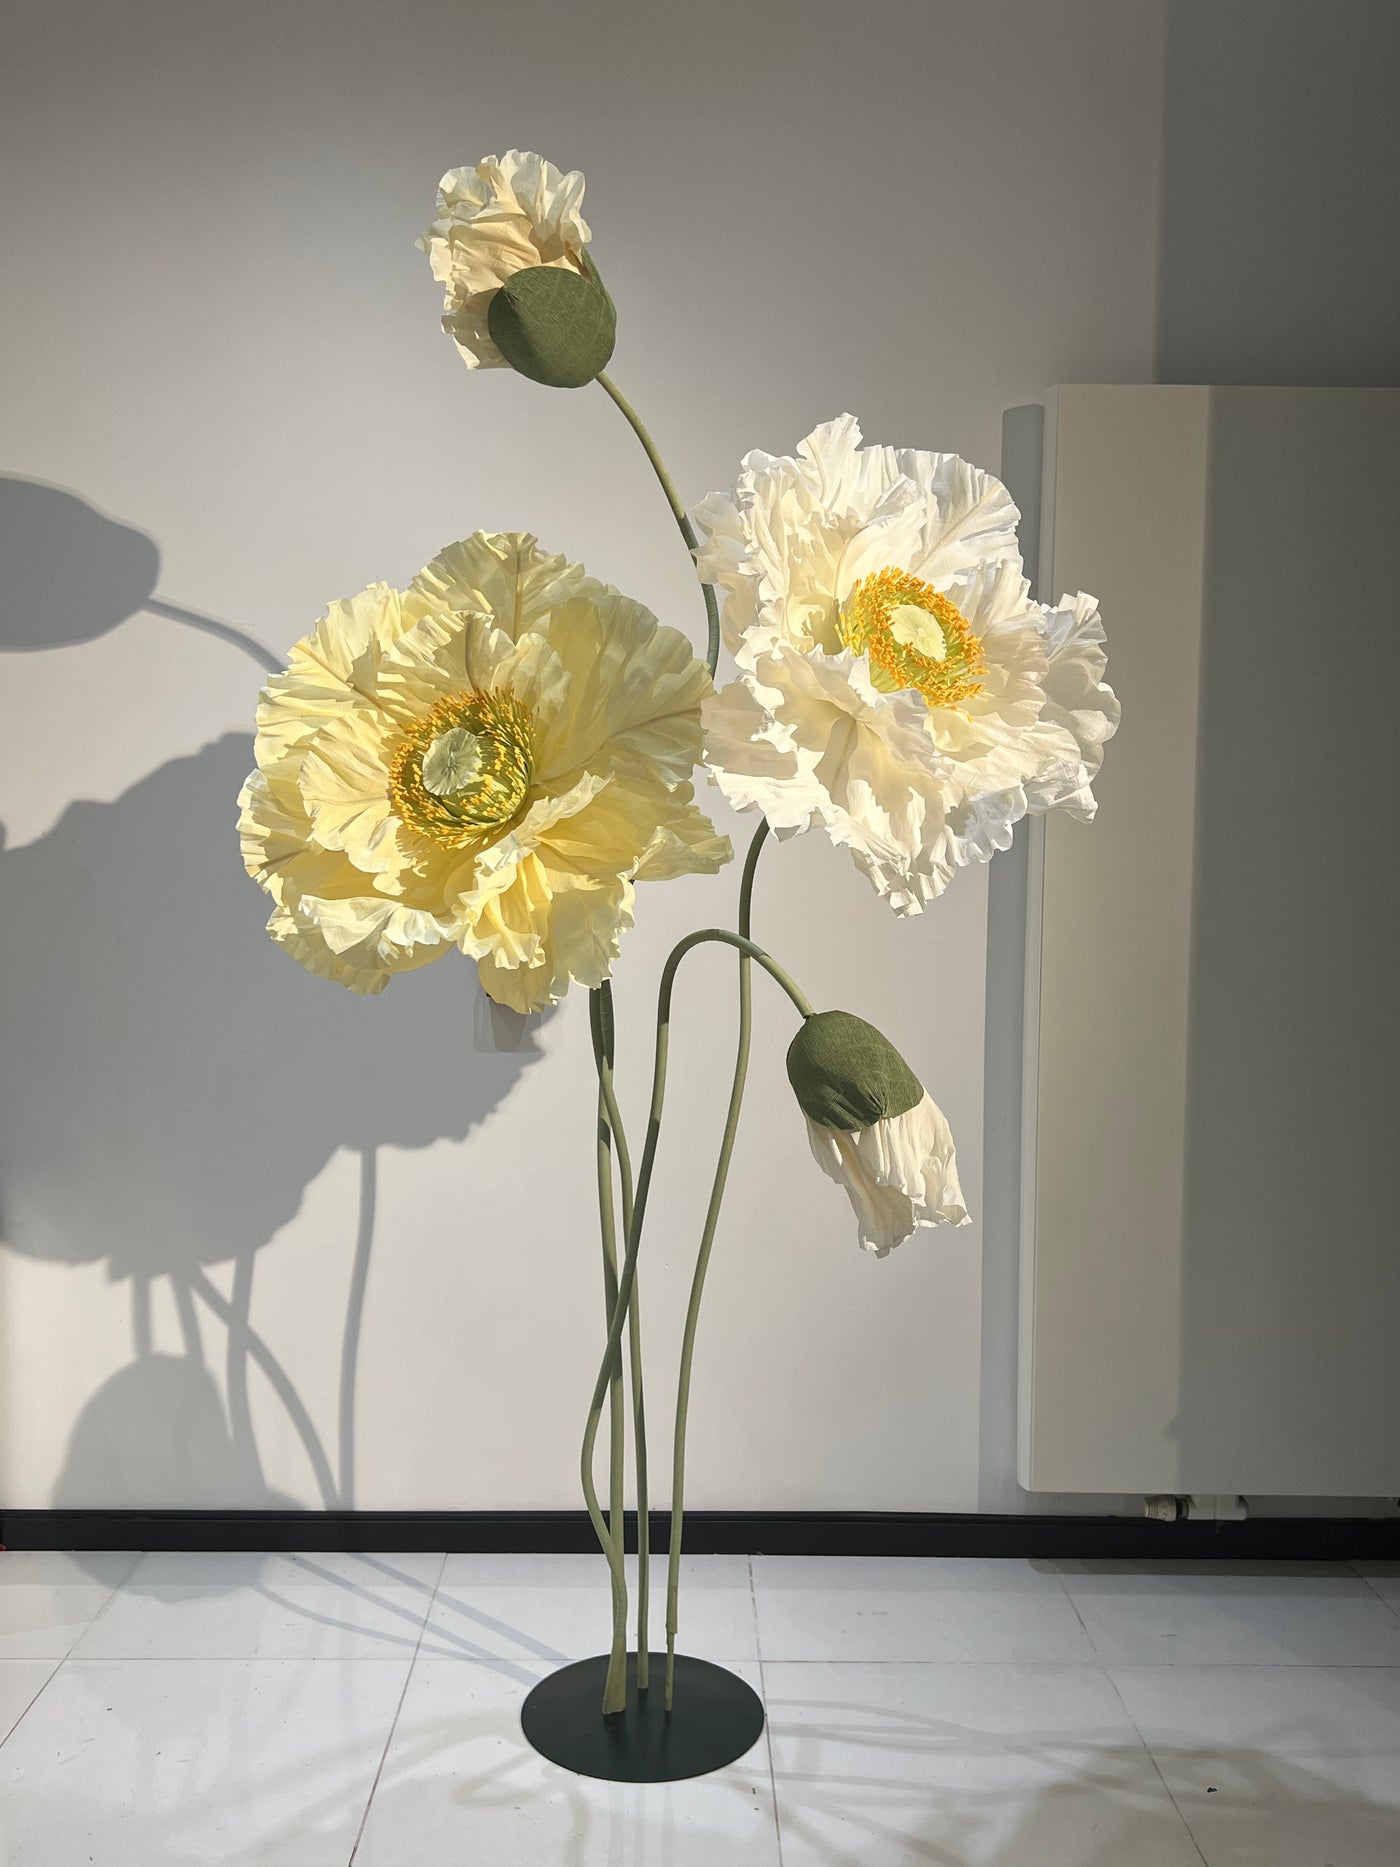 Oversized Paper poppies - Freestanding poppies - a symbol of artistic craftsmanship and a perfect addition to any home or workspace.